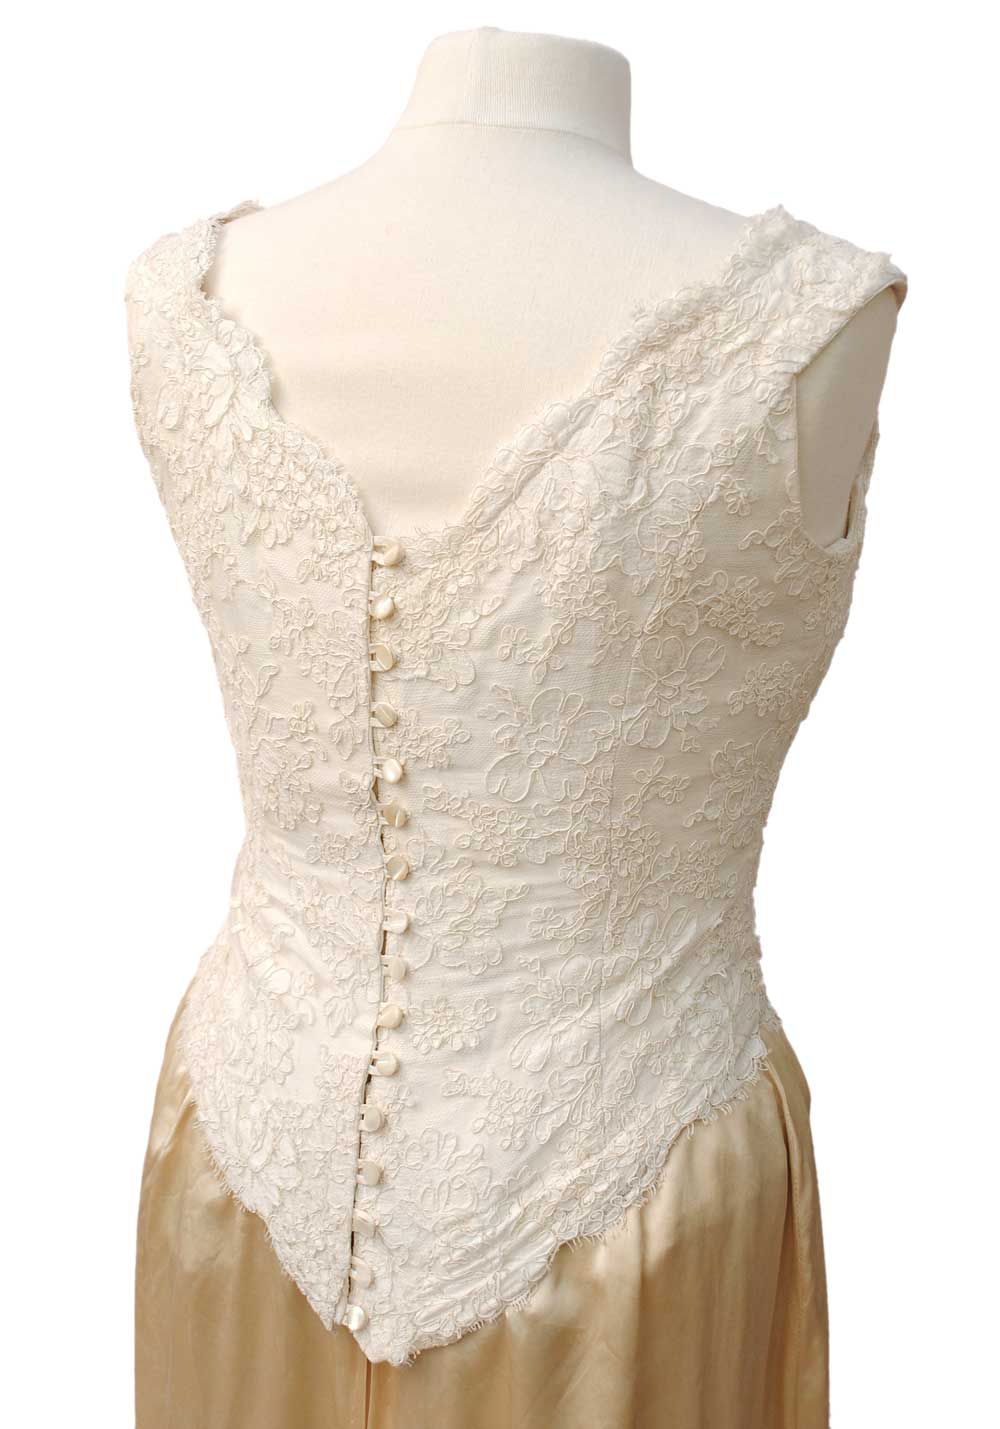 1990s Vintage Cream Lace Bustier Corset Top • Button Back fastening